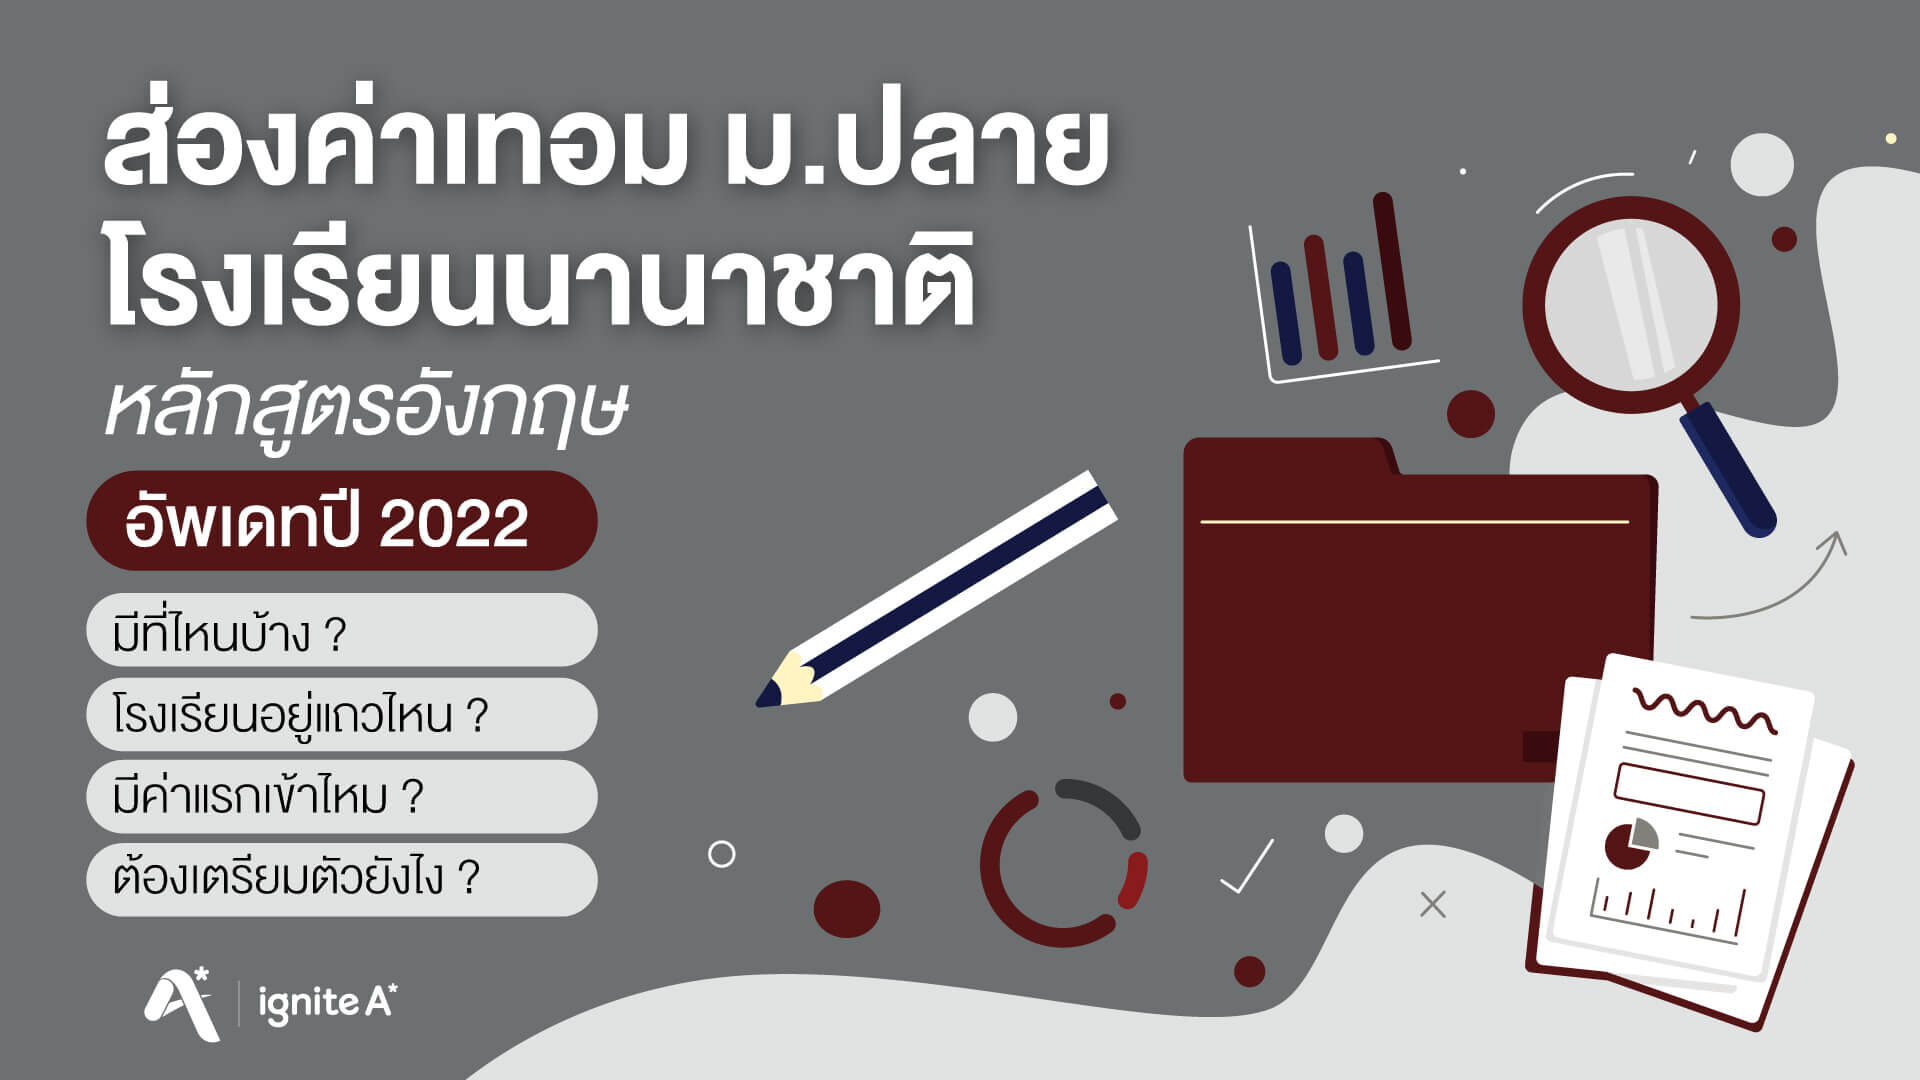 Tuition fee for international schools in Thailand, latest update 2022, Ignite A Star.